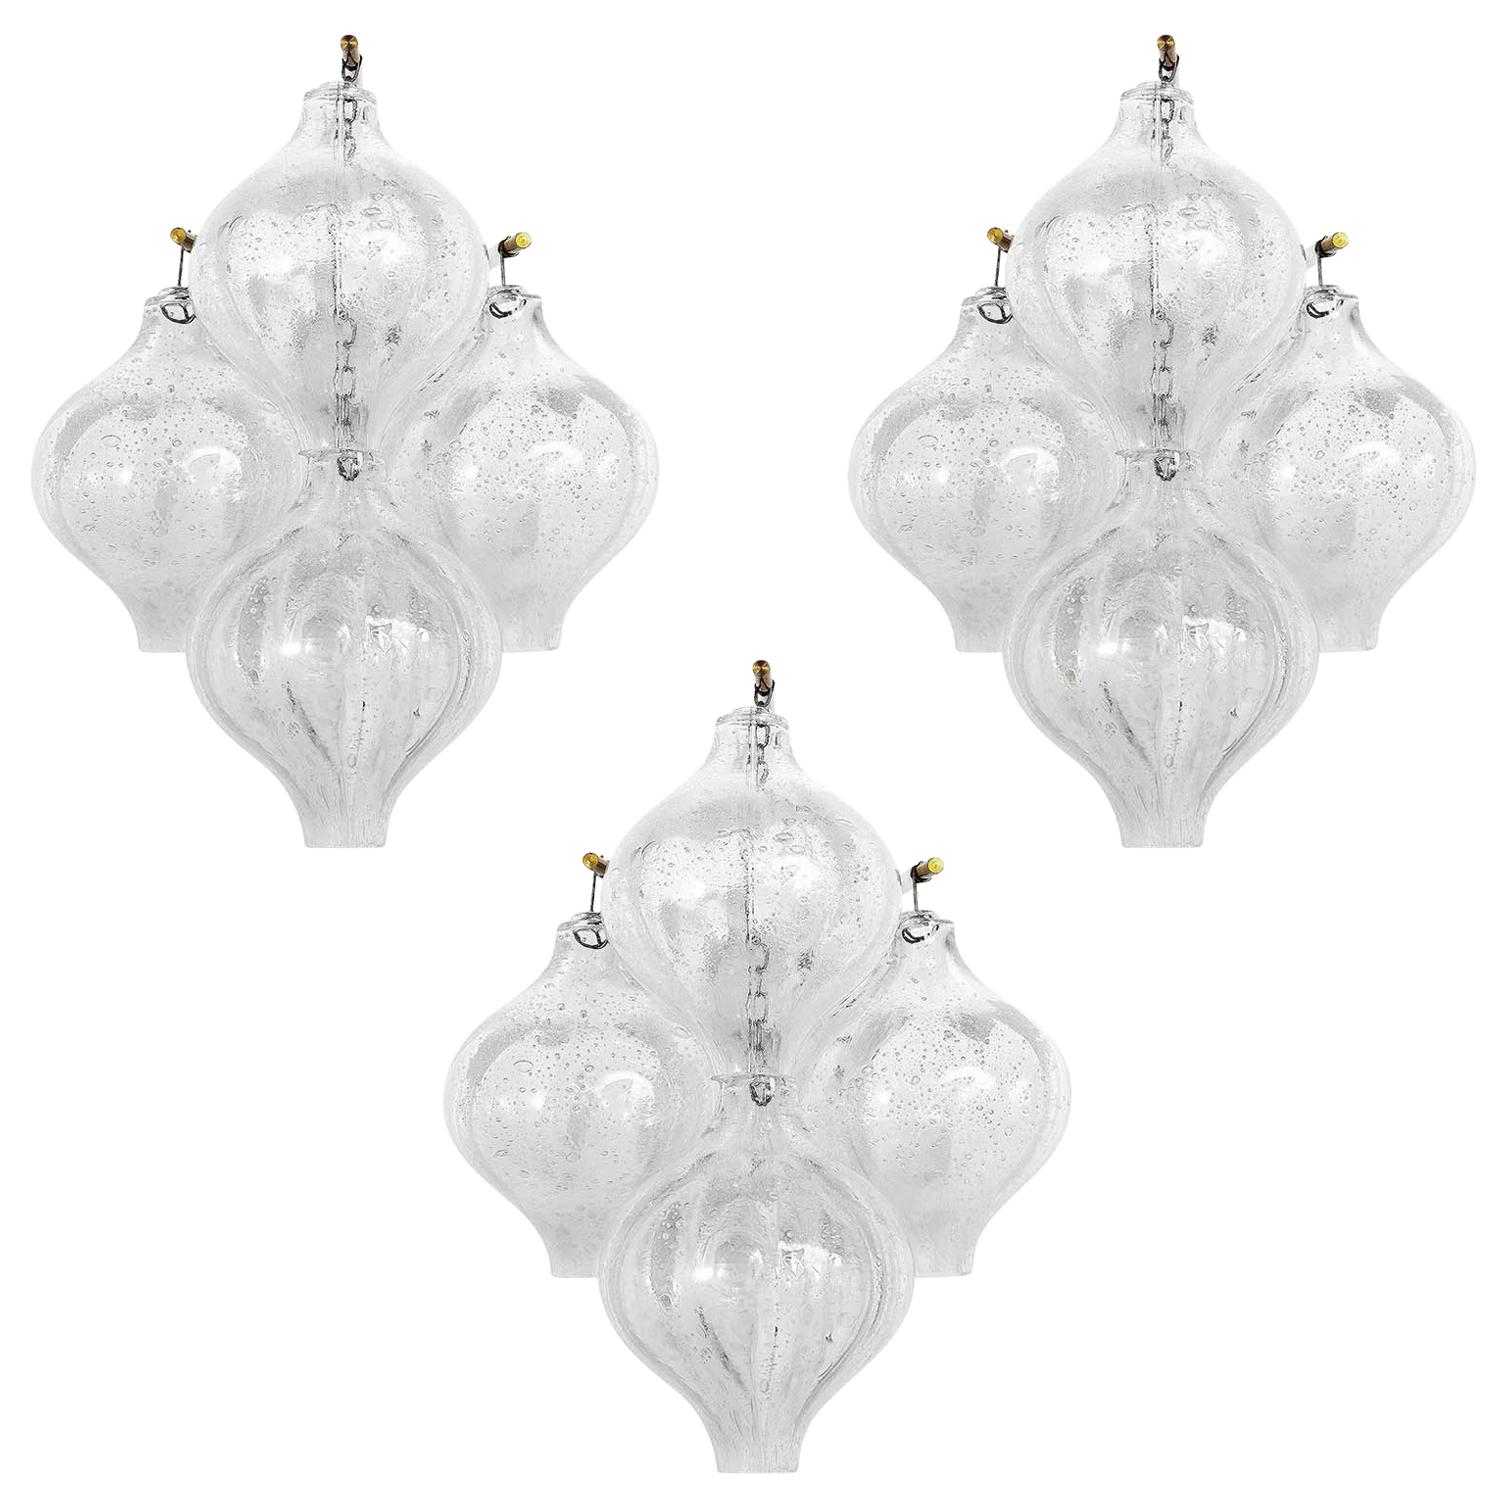 One of four 'Tulipan' glass wall light fixtures by J.T. Kalmar, Austria, Vienna, manufactured in midcentury, circa 1970 (late 1960s or early 1970s).
Currently 8 pieces are available.
The name Tulipan derives from the tulip shaped hand blown bubble